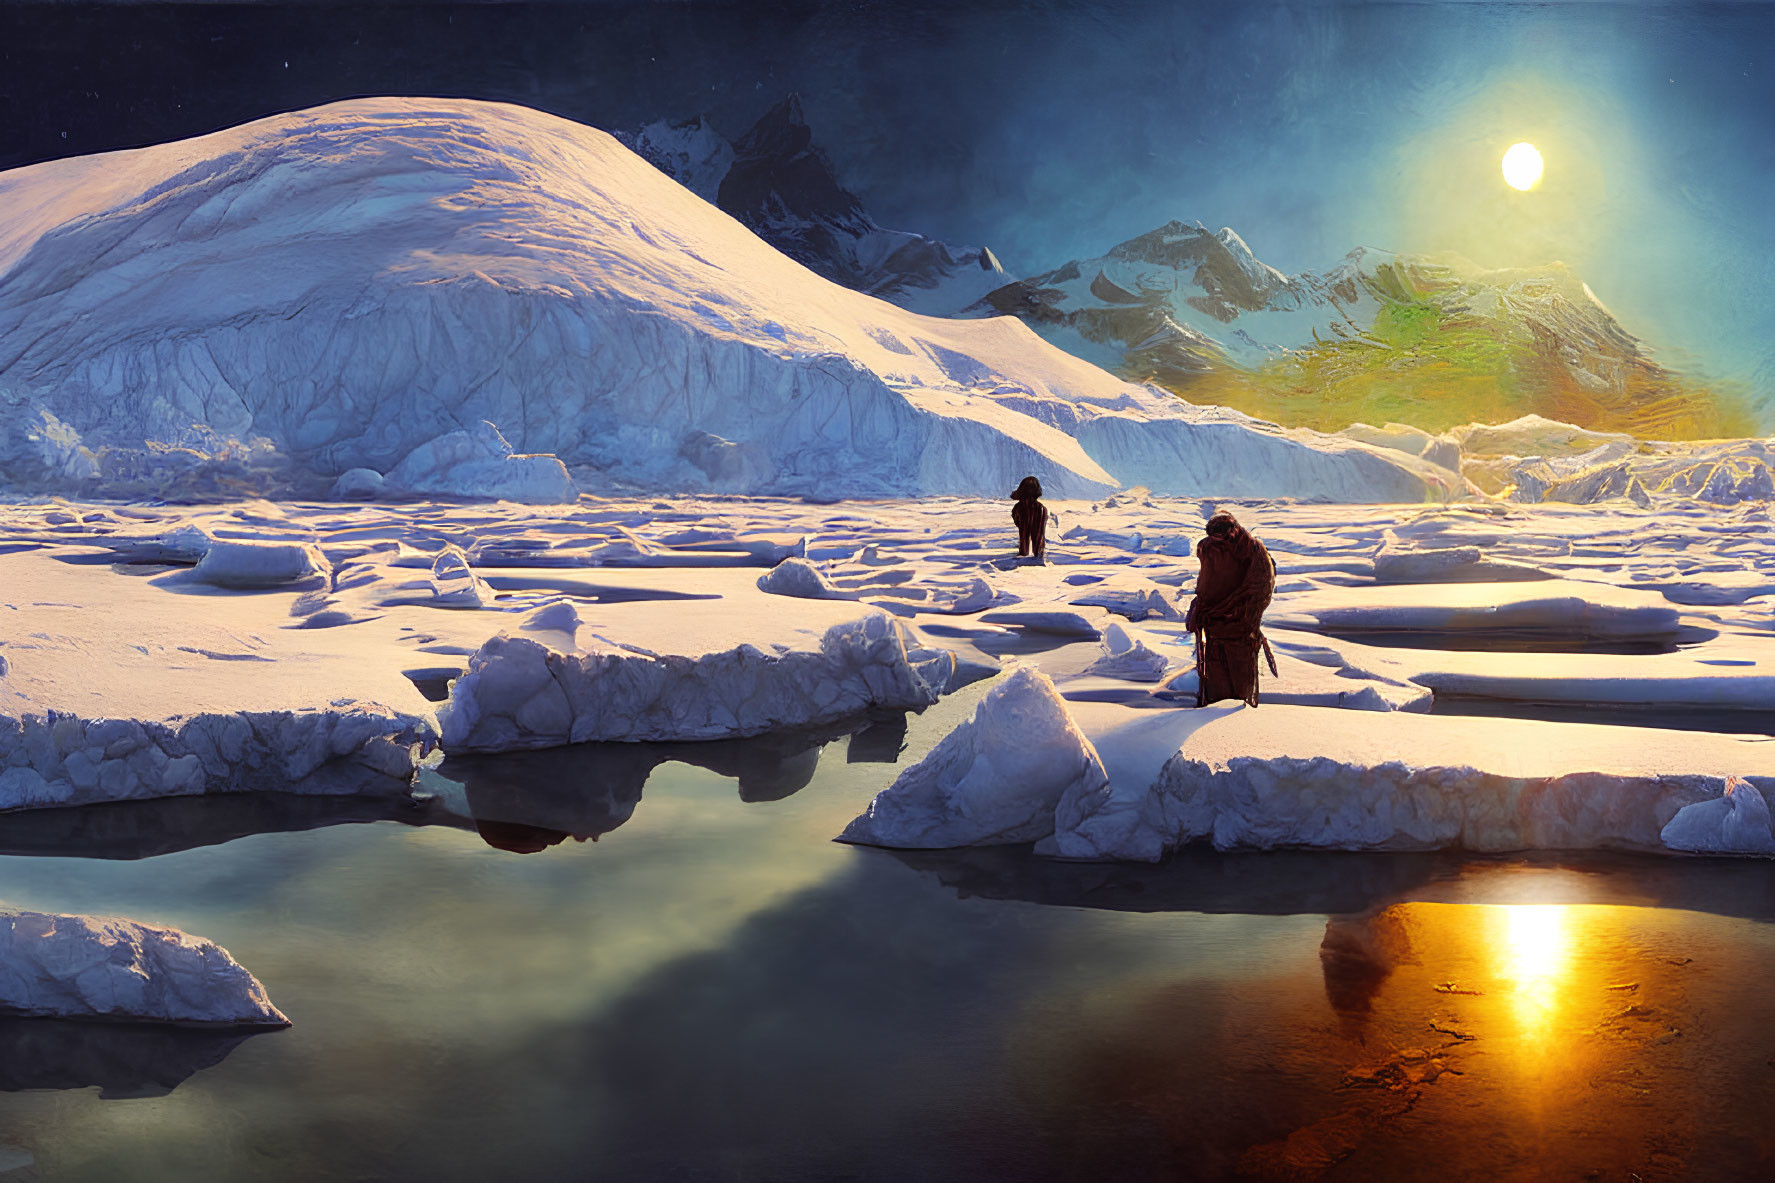 People walking on ice floes with snowy mountain and sunset/sunrise background